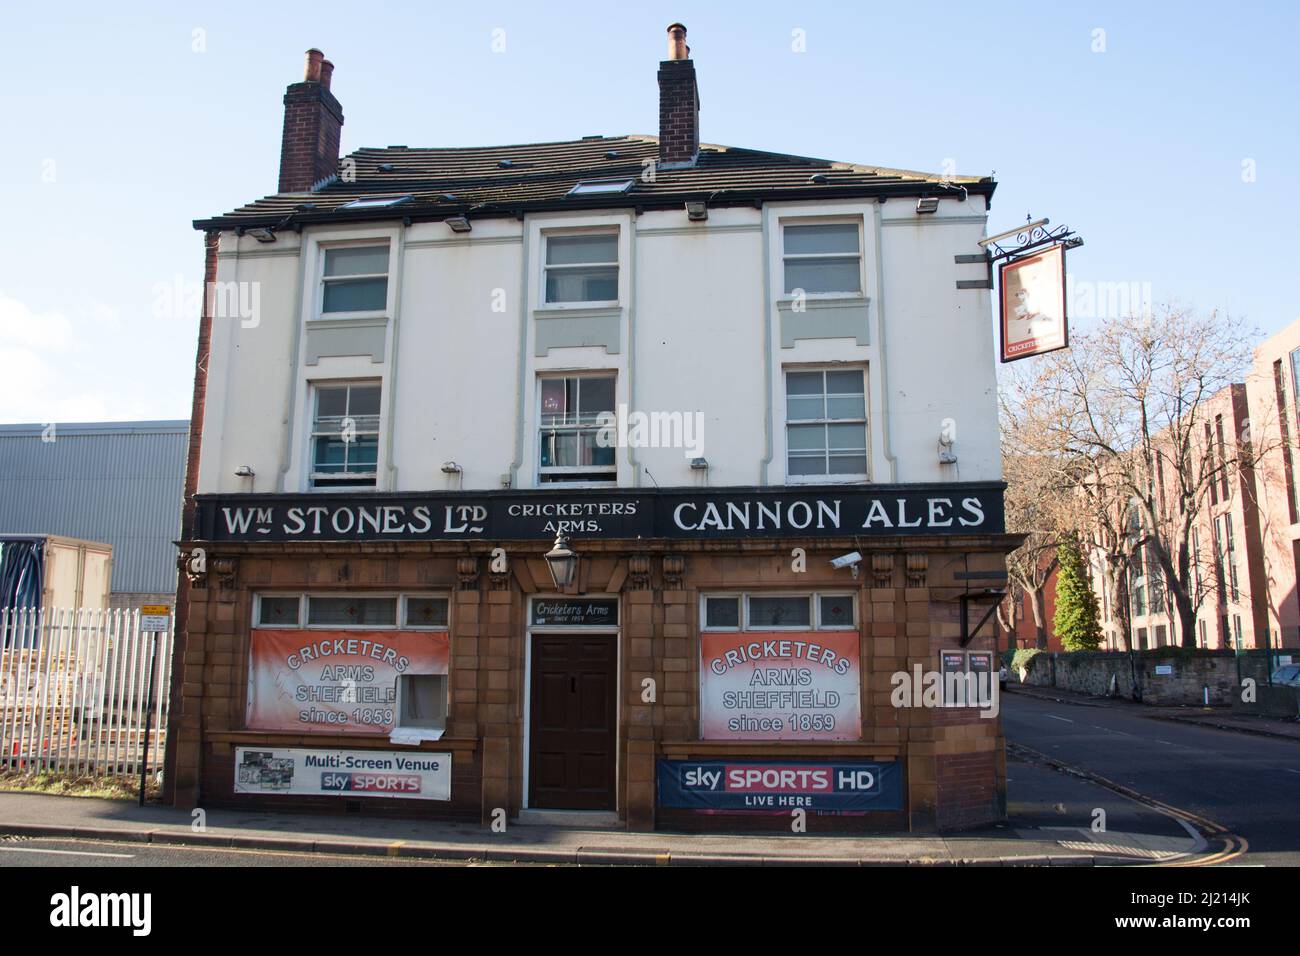 The Cricketer's Arms, Bramall Lane, Sheffield in South Yorkshire in the UK Stock Photo